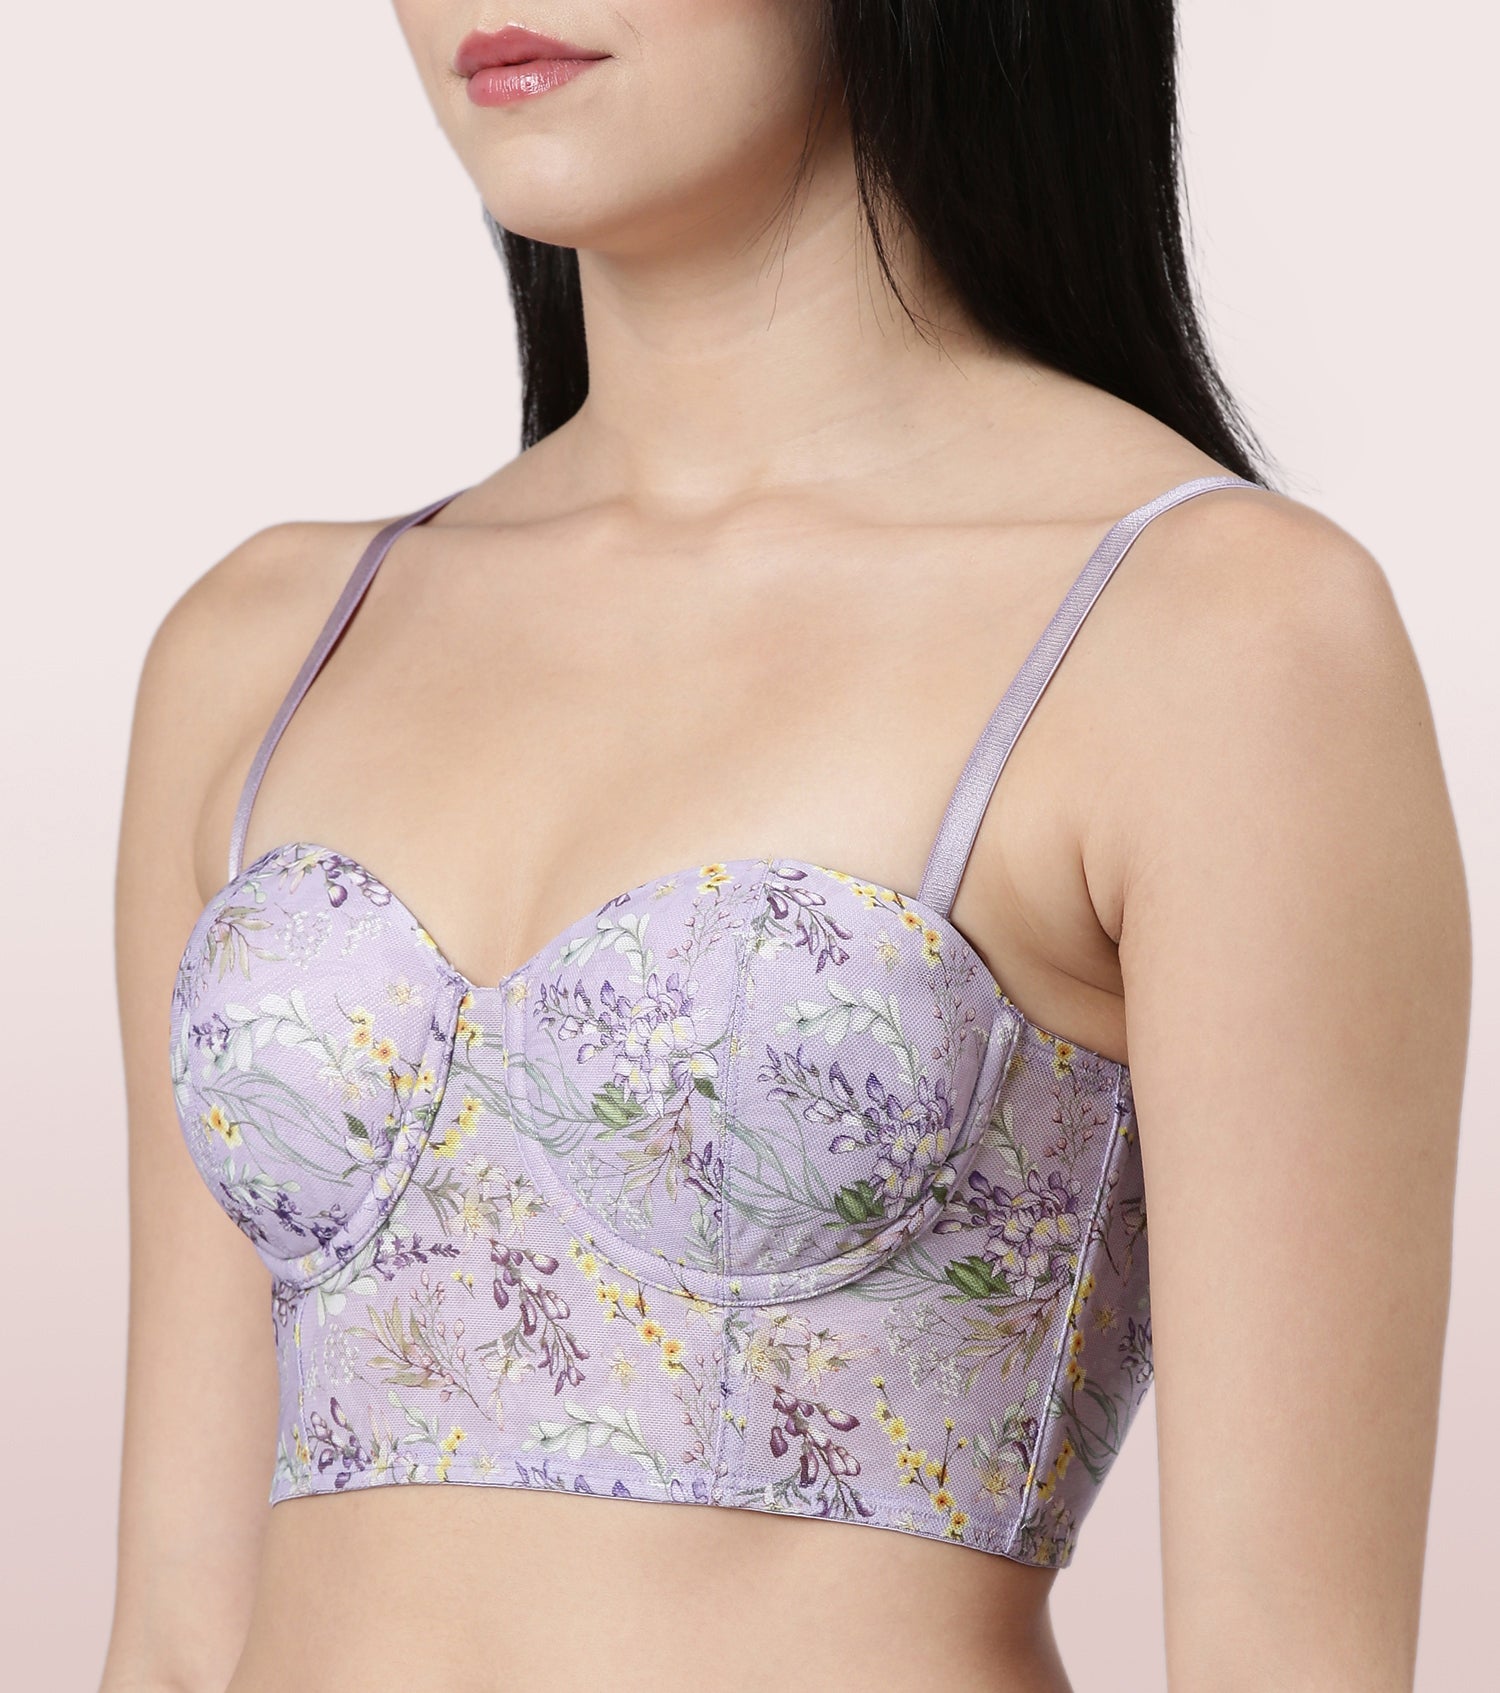 Enamor F130
FLEXI LIGHT PRINTED BUSTIER BRA
PADDED  WIRED  HIGH COVERAGE